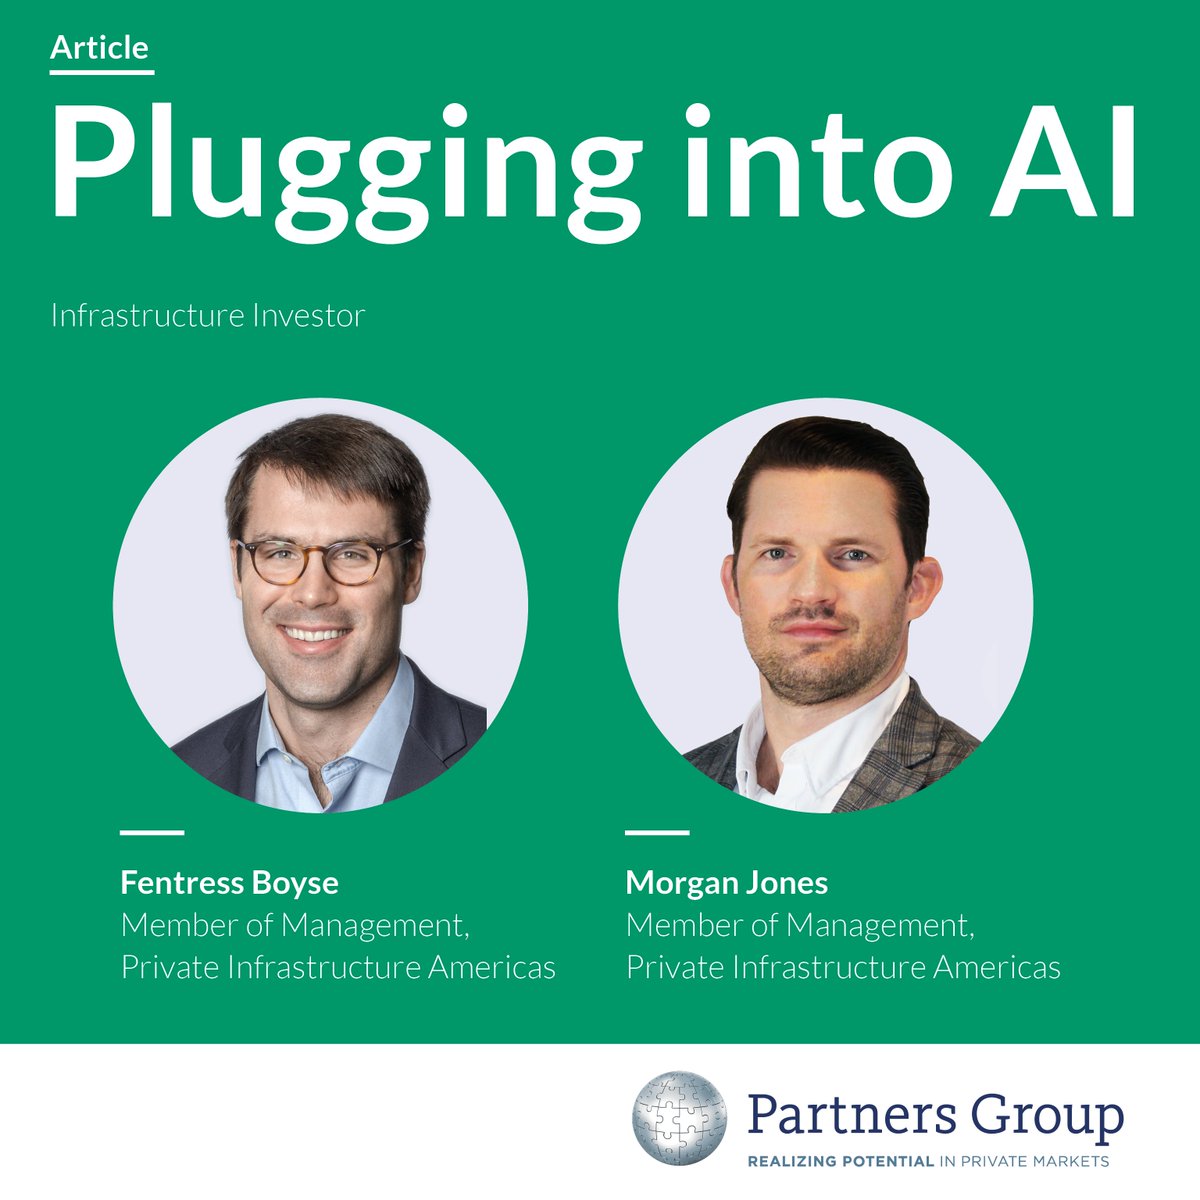 Our Private #Infrastructure Americas team spoke with @IInews about how consumer and enterprise demand for data and generative #AI points to a bullish future for #datacentre operators. Read the interview here: partnersgroup.com/en/news-views/…